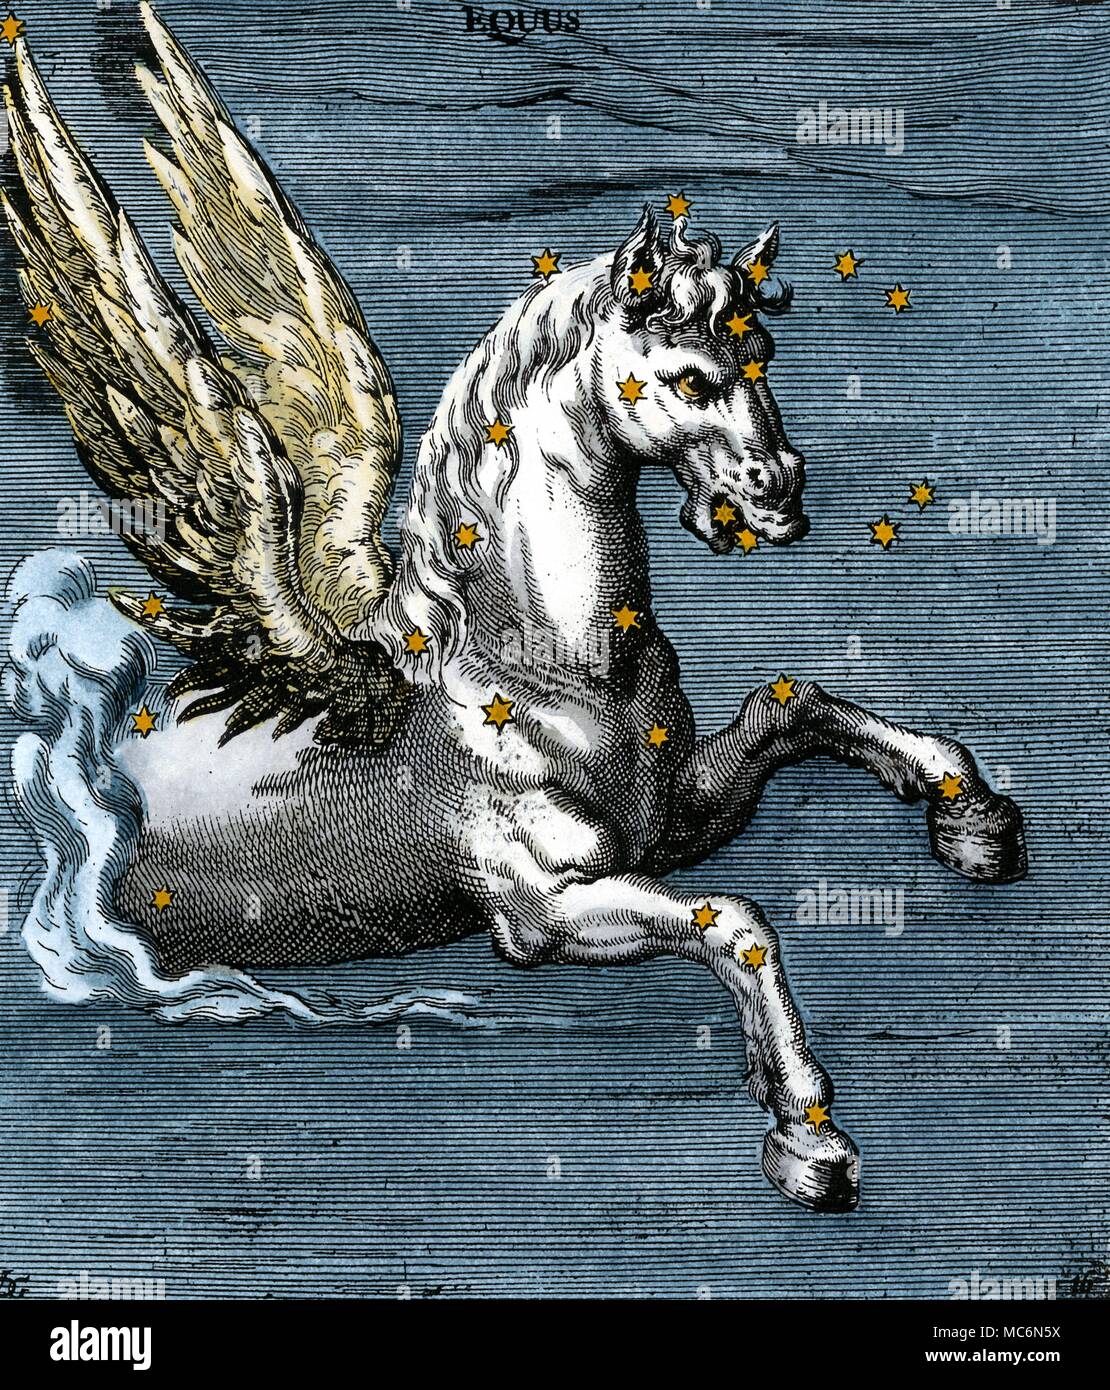 Constellations Pegasus Eighteenth century hand coloured engraving of constellational Pegasus based on the illumination in the 9th century Aratea manuscript in Leiden which is itself based on the Latin translation of the original Greek of Aratus written in the first century of our era. Aratus was born in about 315 BC in Soli on the south coast of present Turkey and is said to have written his phaenomena for the ruler of Macedonia Antigonus Gonatas Stock Photo